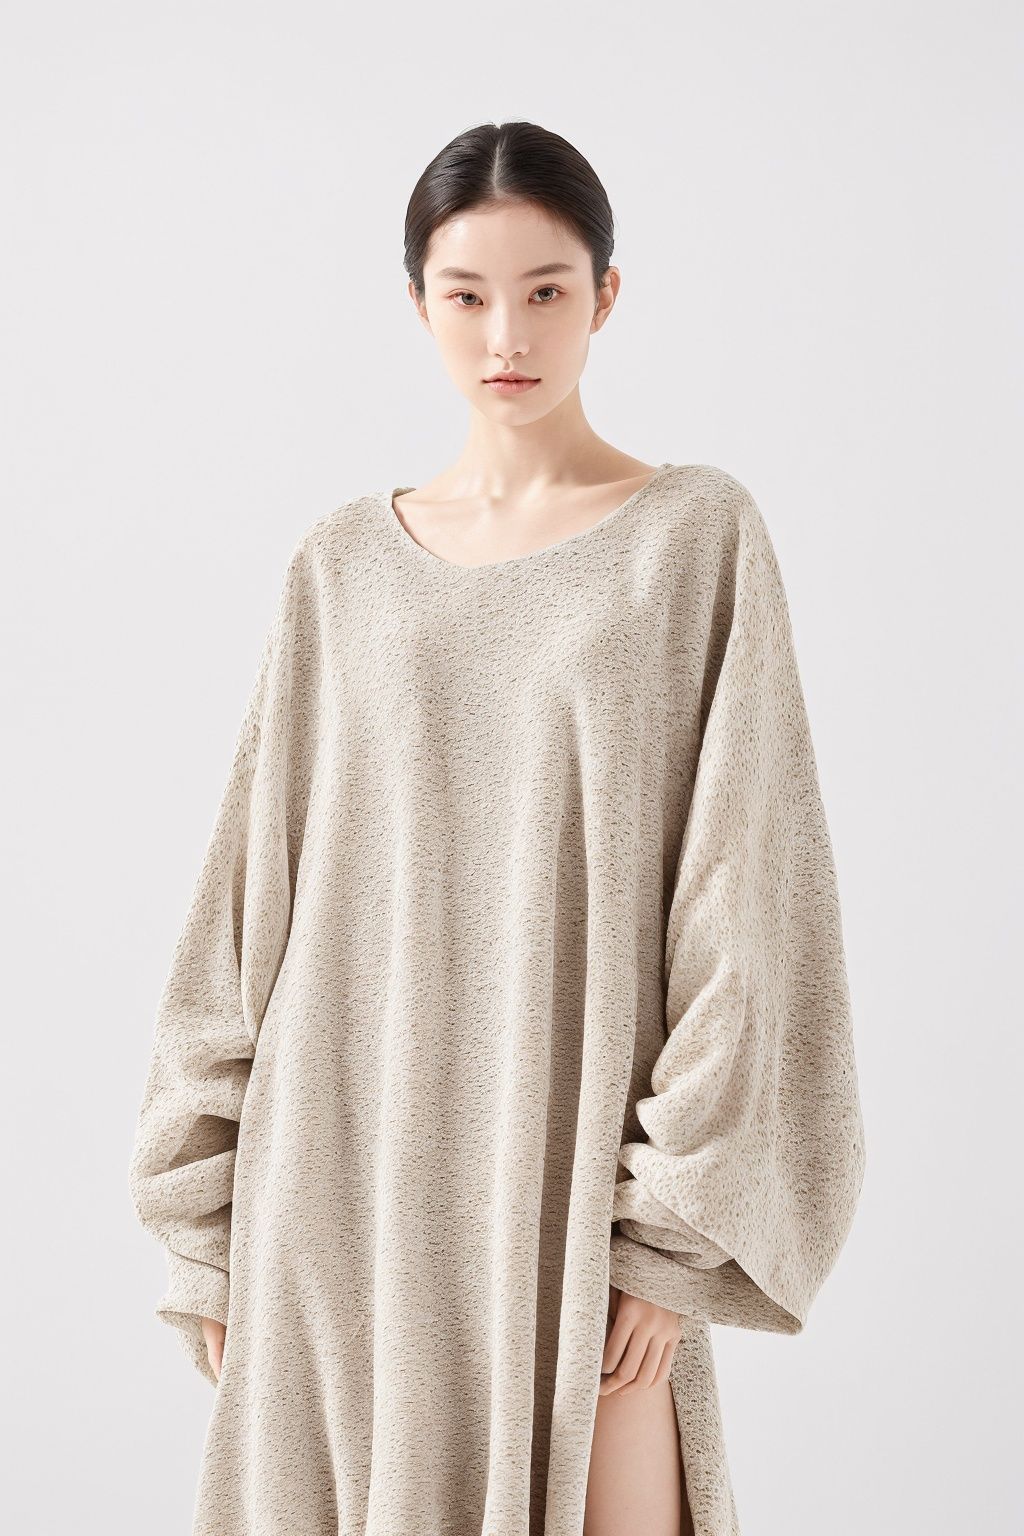 (a portrait of a woman:1.2), ([large clothes : marble texture]:1.4), (low contract:1.1), realism, professional photo, studio shot, modern fashion, (simple background:1.3), detailed, (minimalism:1.1)
